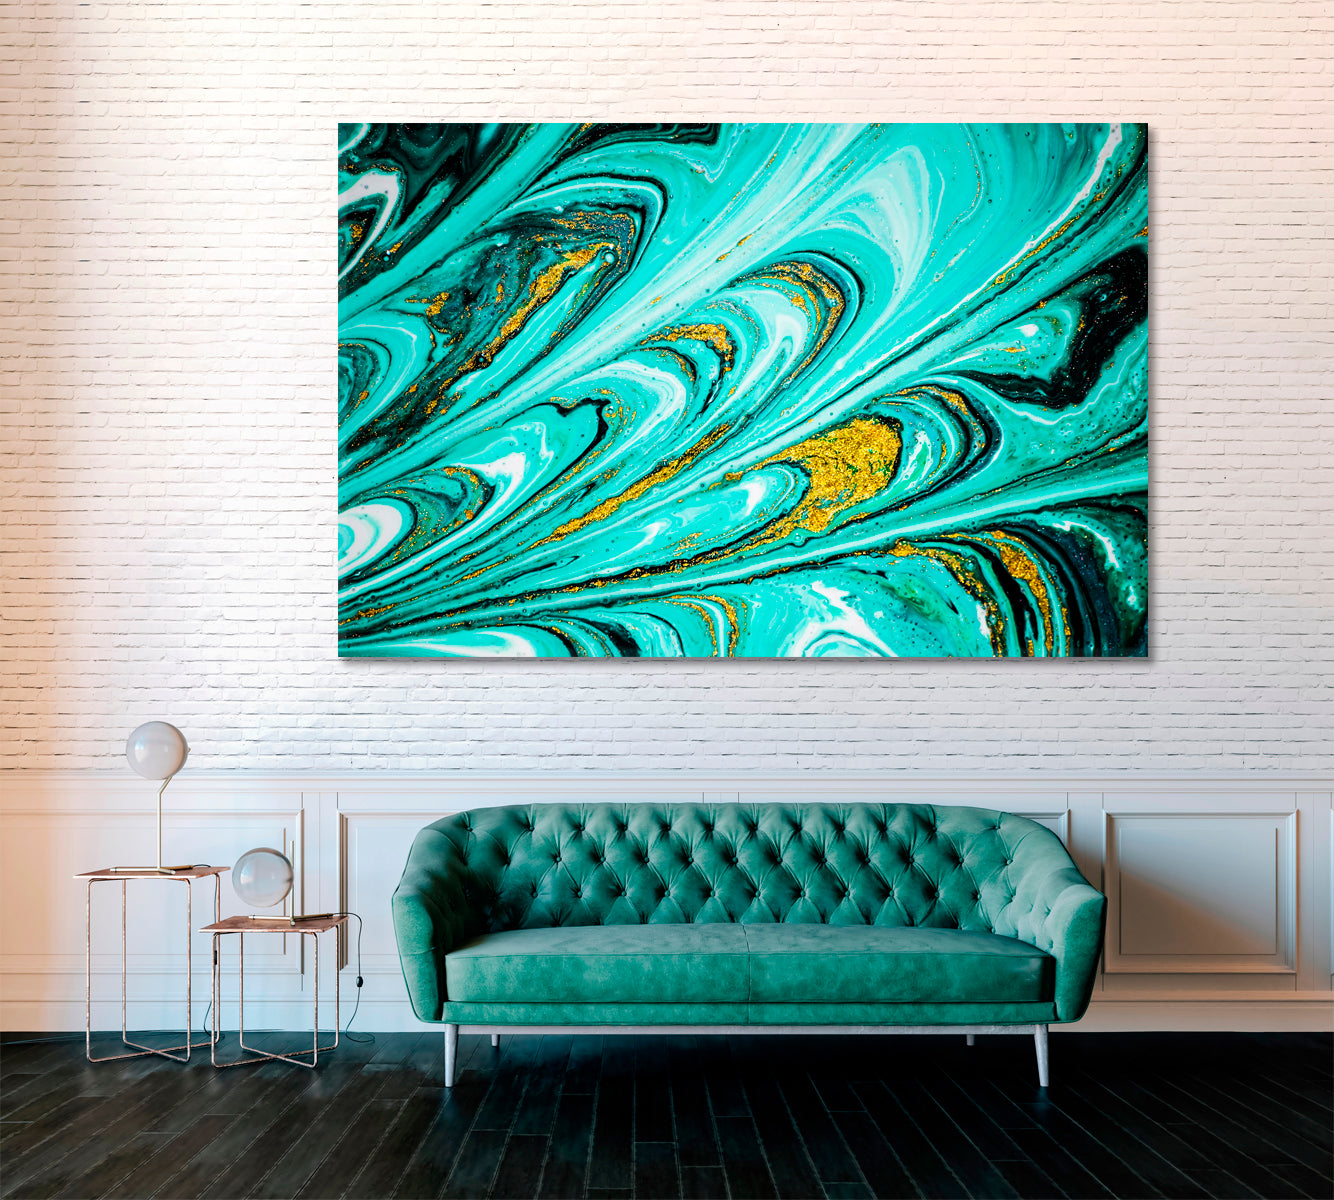 Abstract Marble Wavy Pattern Canvas Print ArtLexy 1 Panel 24"x16" inches 